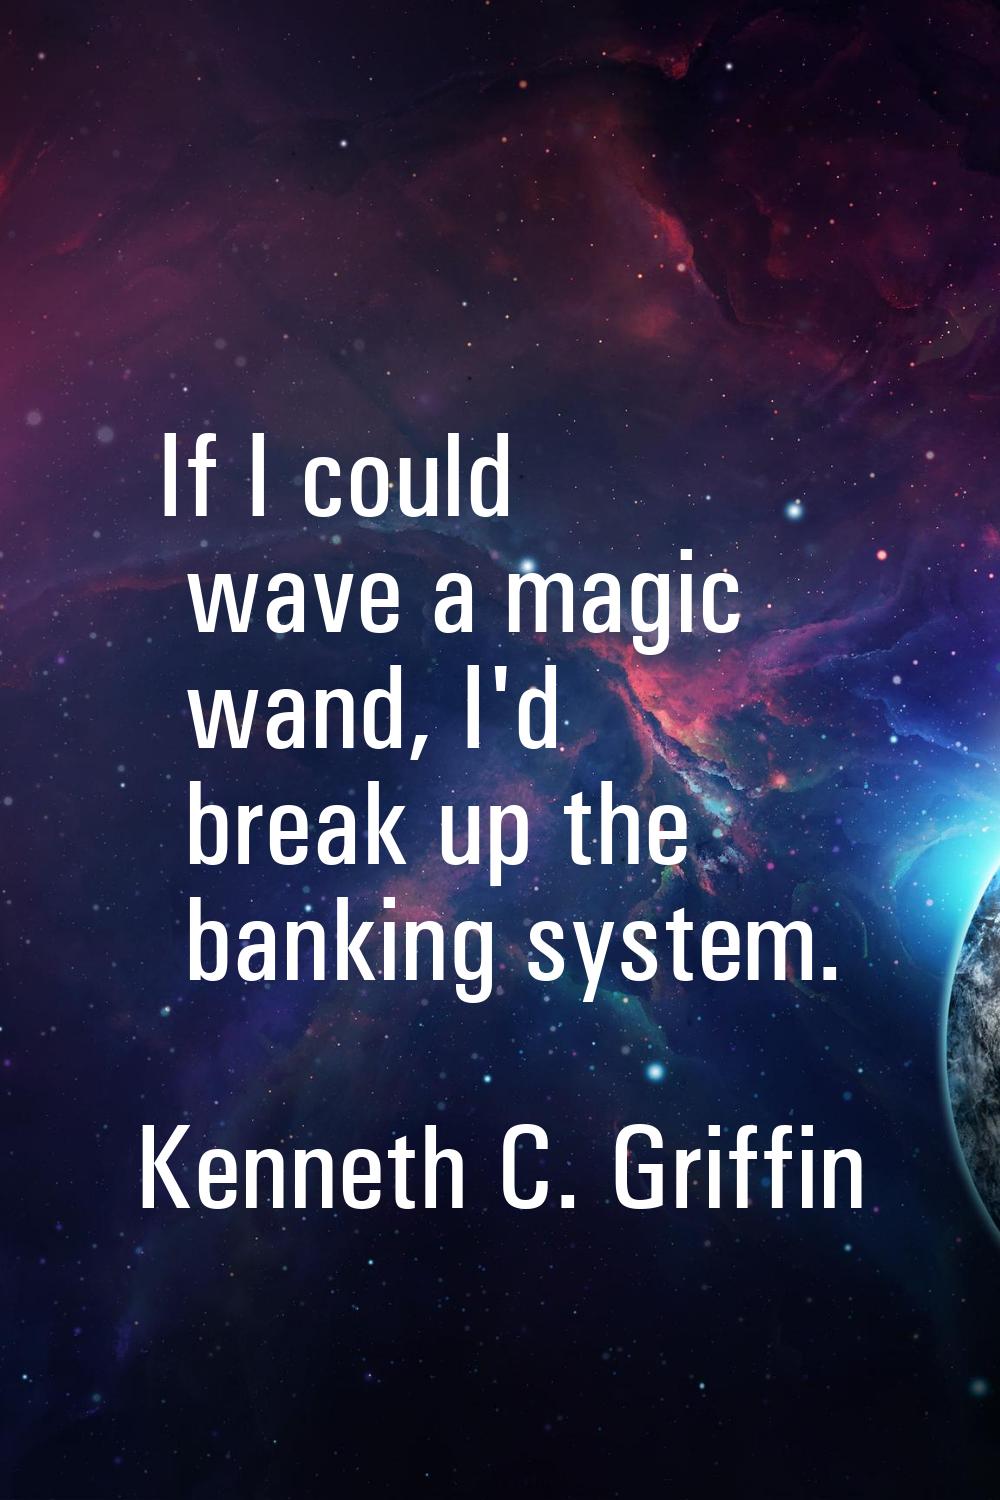 If I could wave a magic wand, I'd break up the banking system.